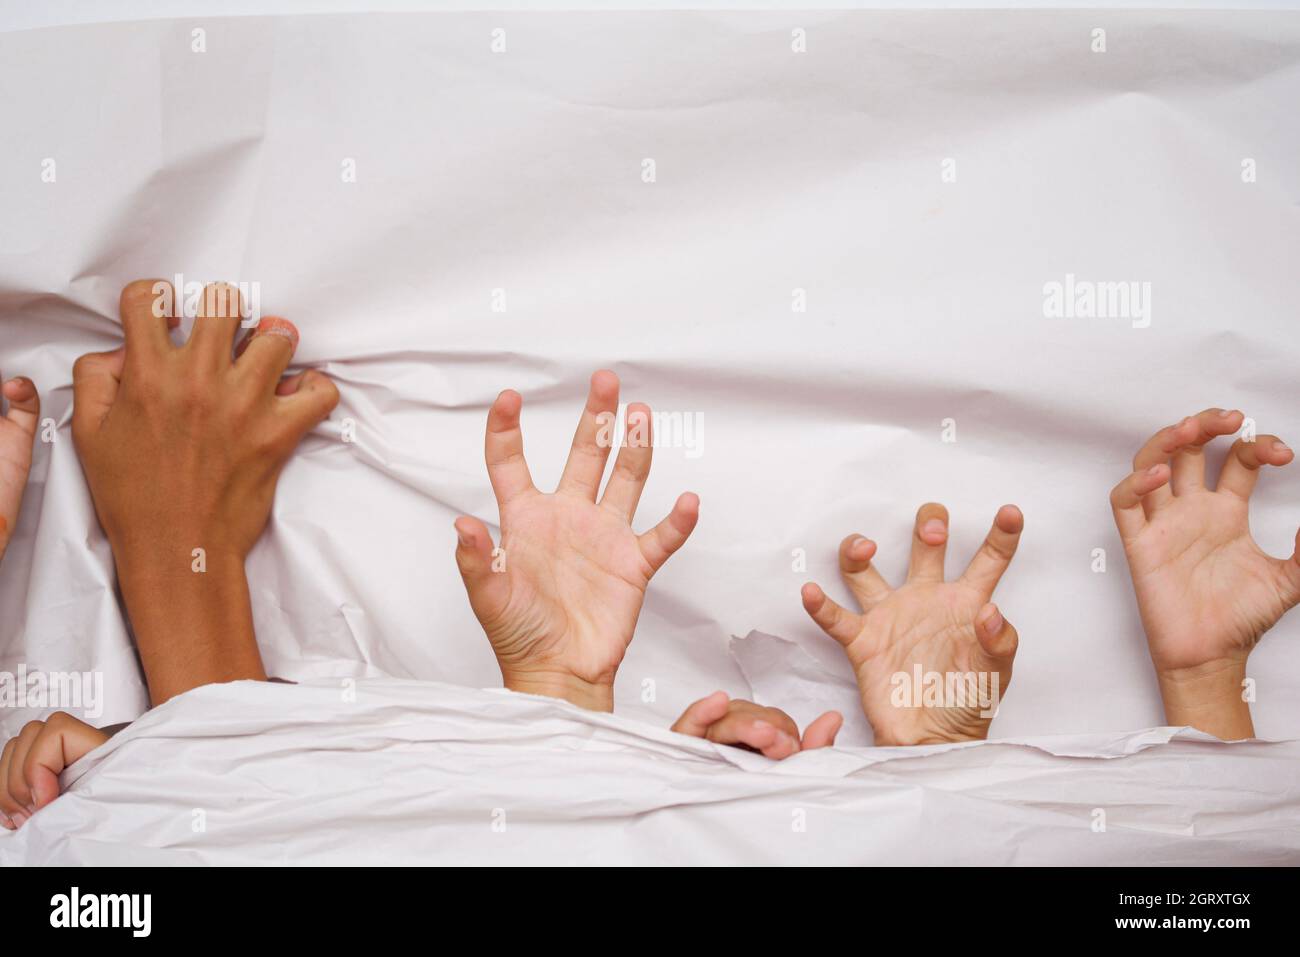 Cropped Hands Of Children On Bed Stock Photo